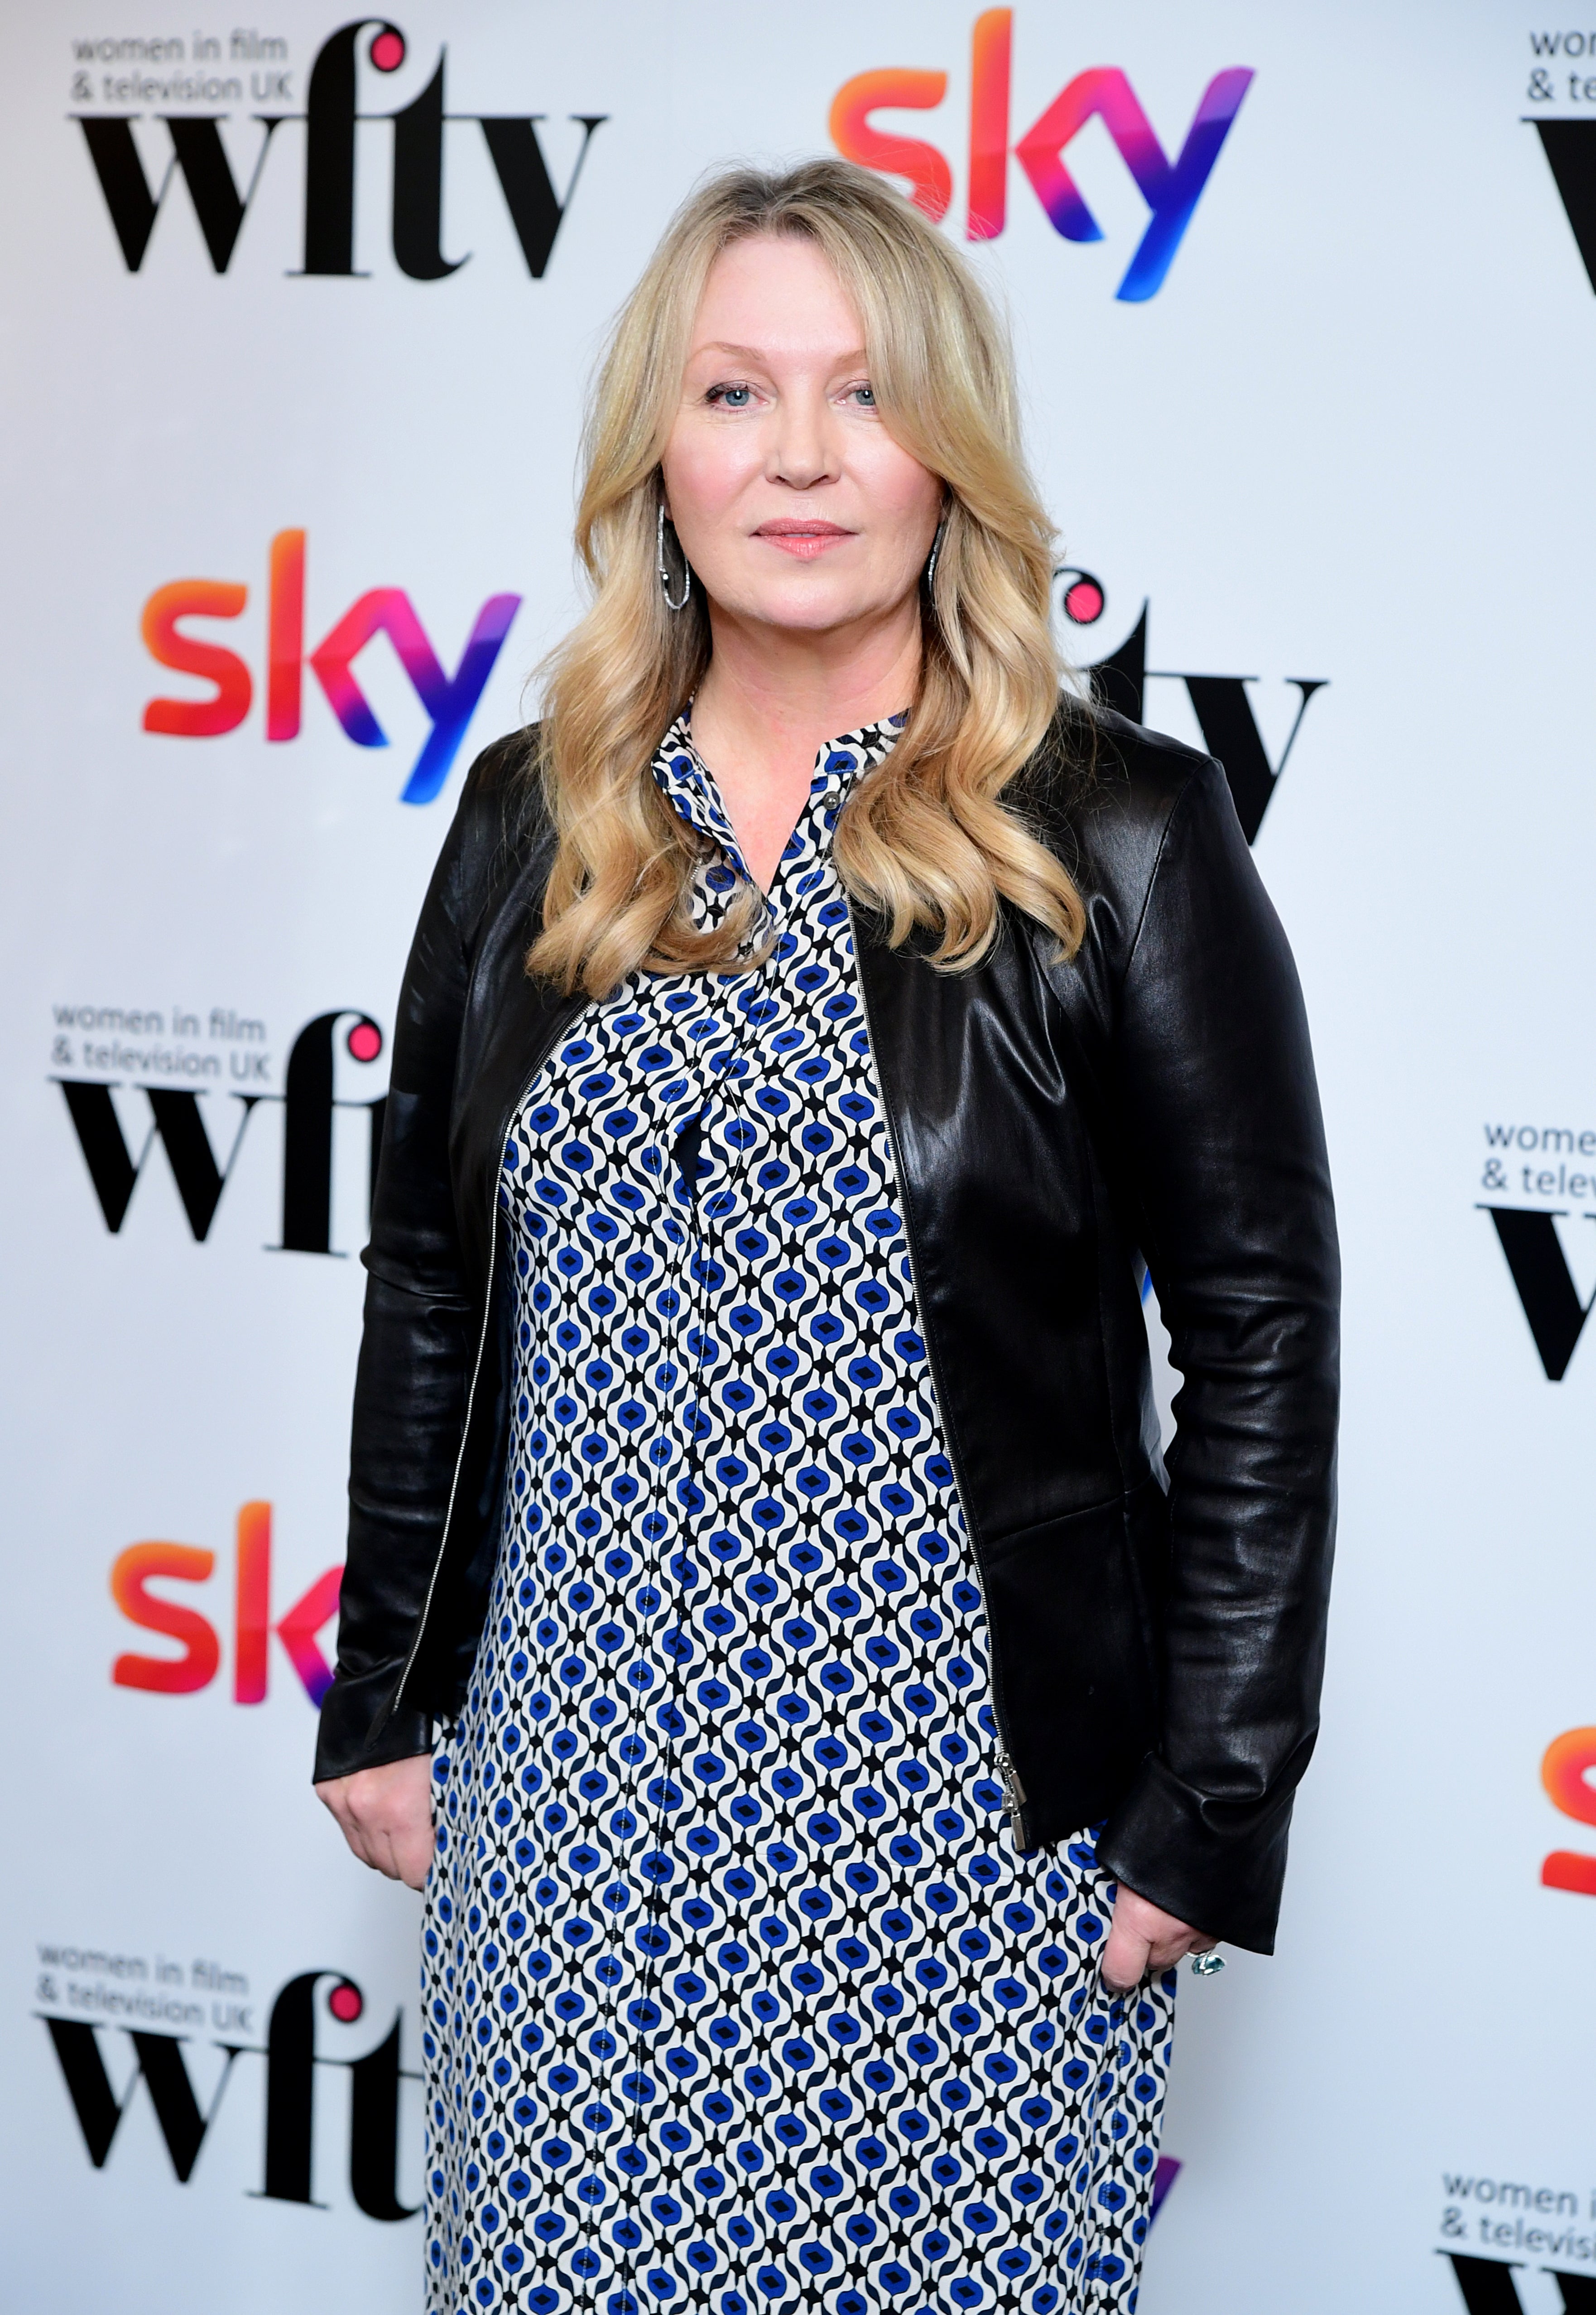 Kirsty Young wants to build a lodge on an island in Loch Lomond (Ian West/PA)